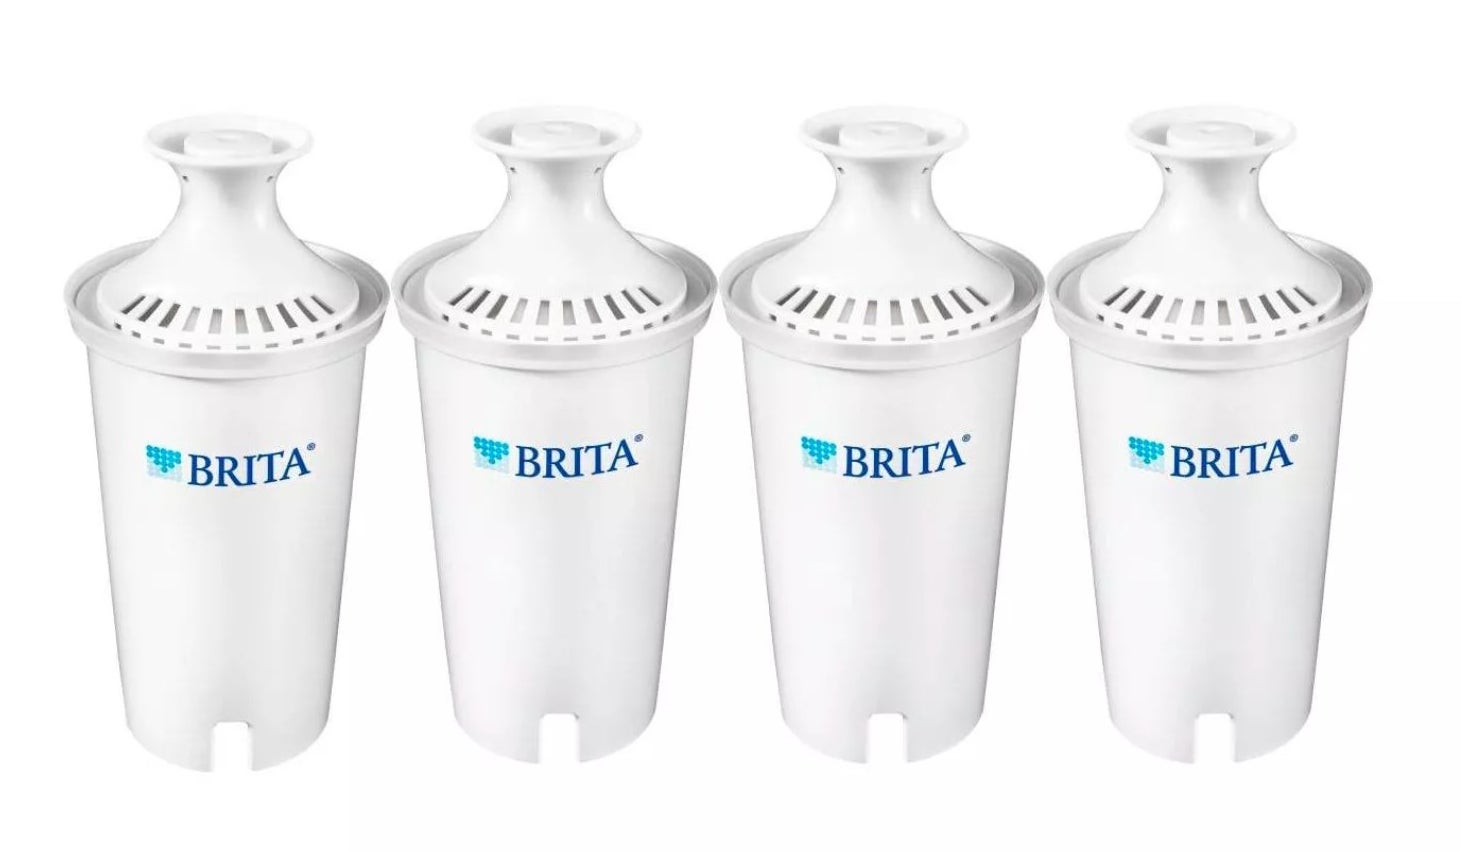 The Brita replacements